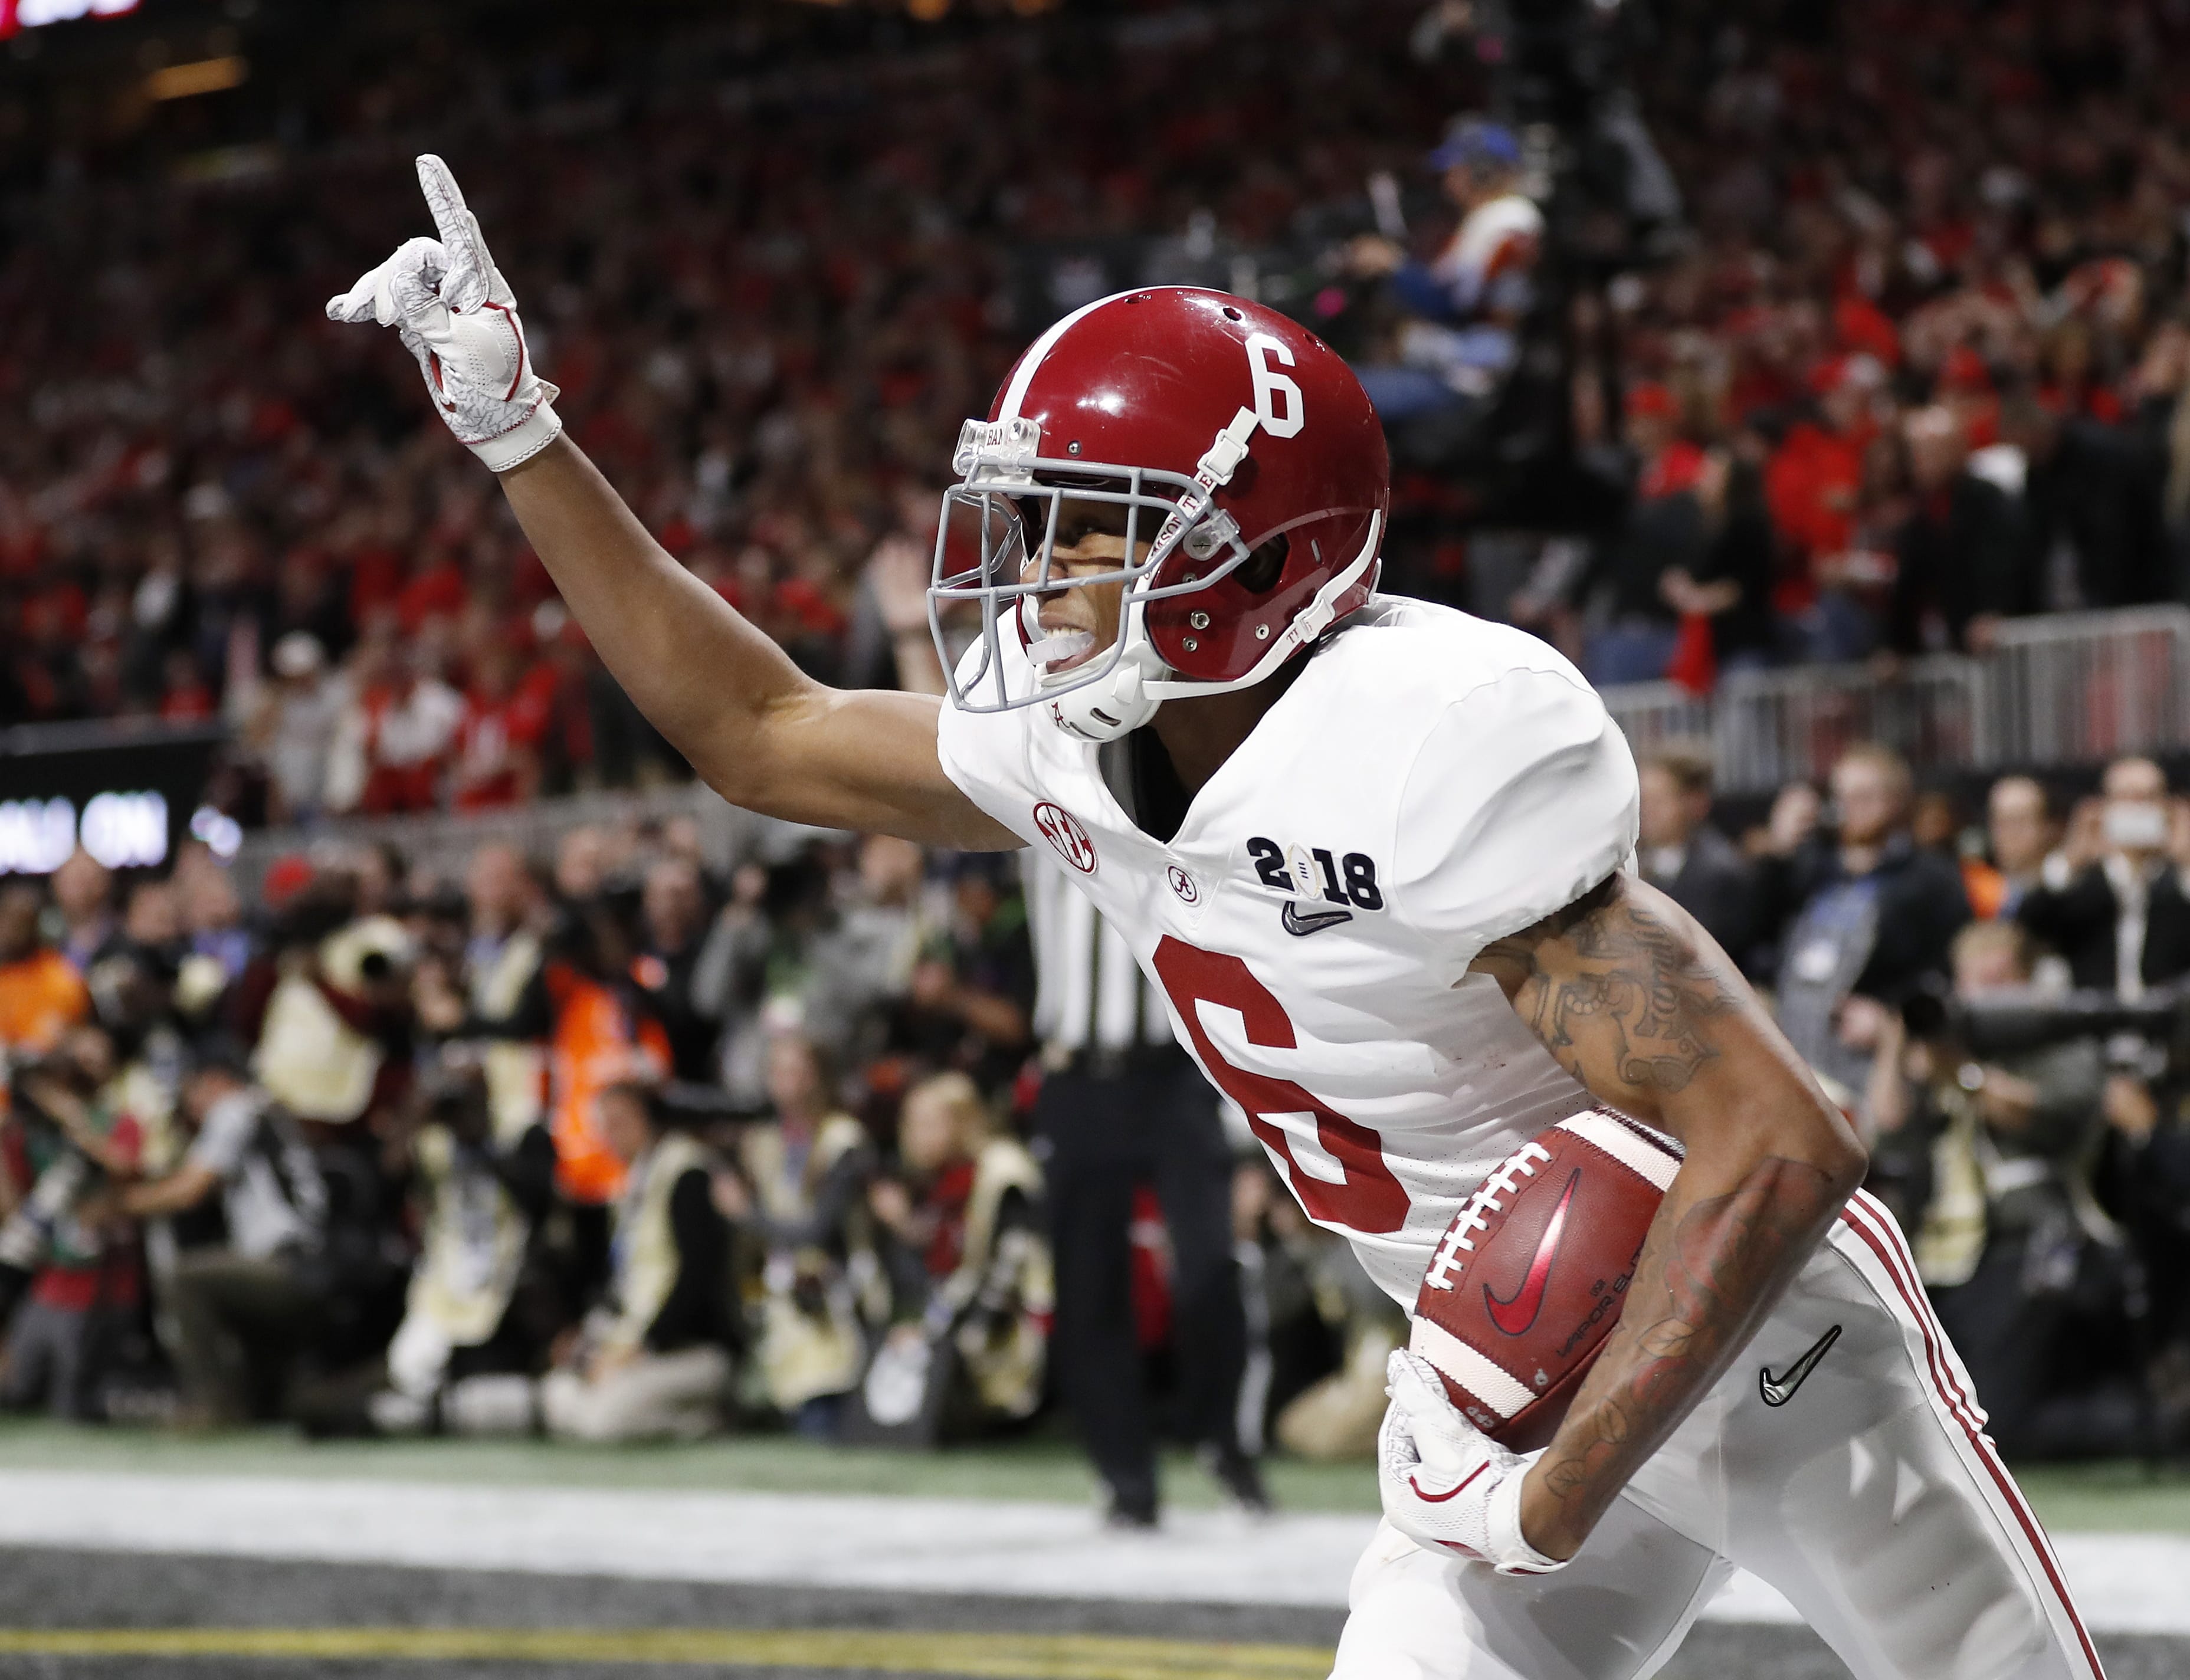 Alabama wide receiver DeVonta Smith (6) and the Crimson Tide open the college football season as the No. 1 team in The AP preseason Top 25 poll. It's the third straight year Alabama is No. 1.